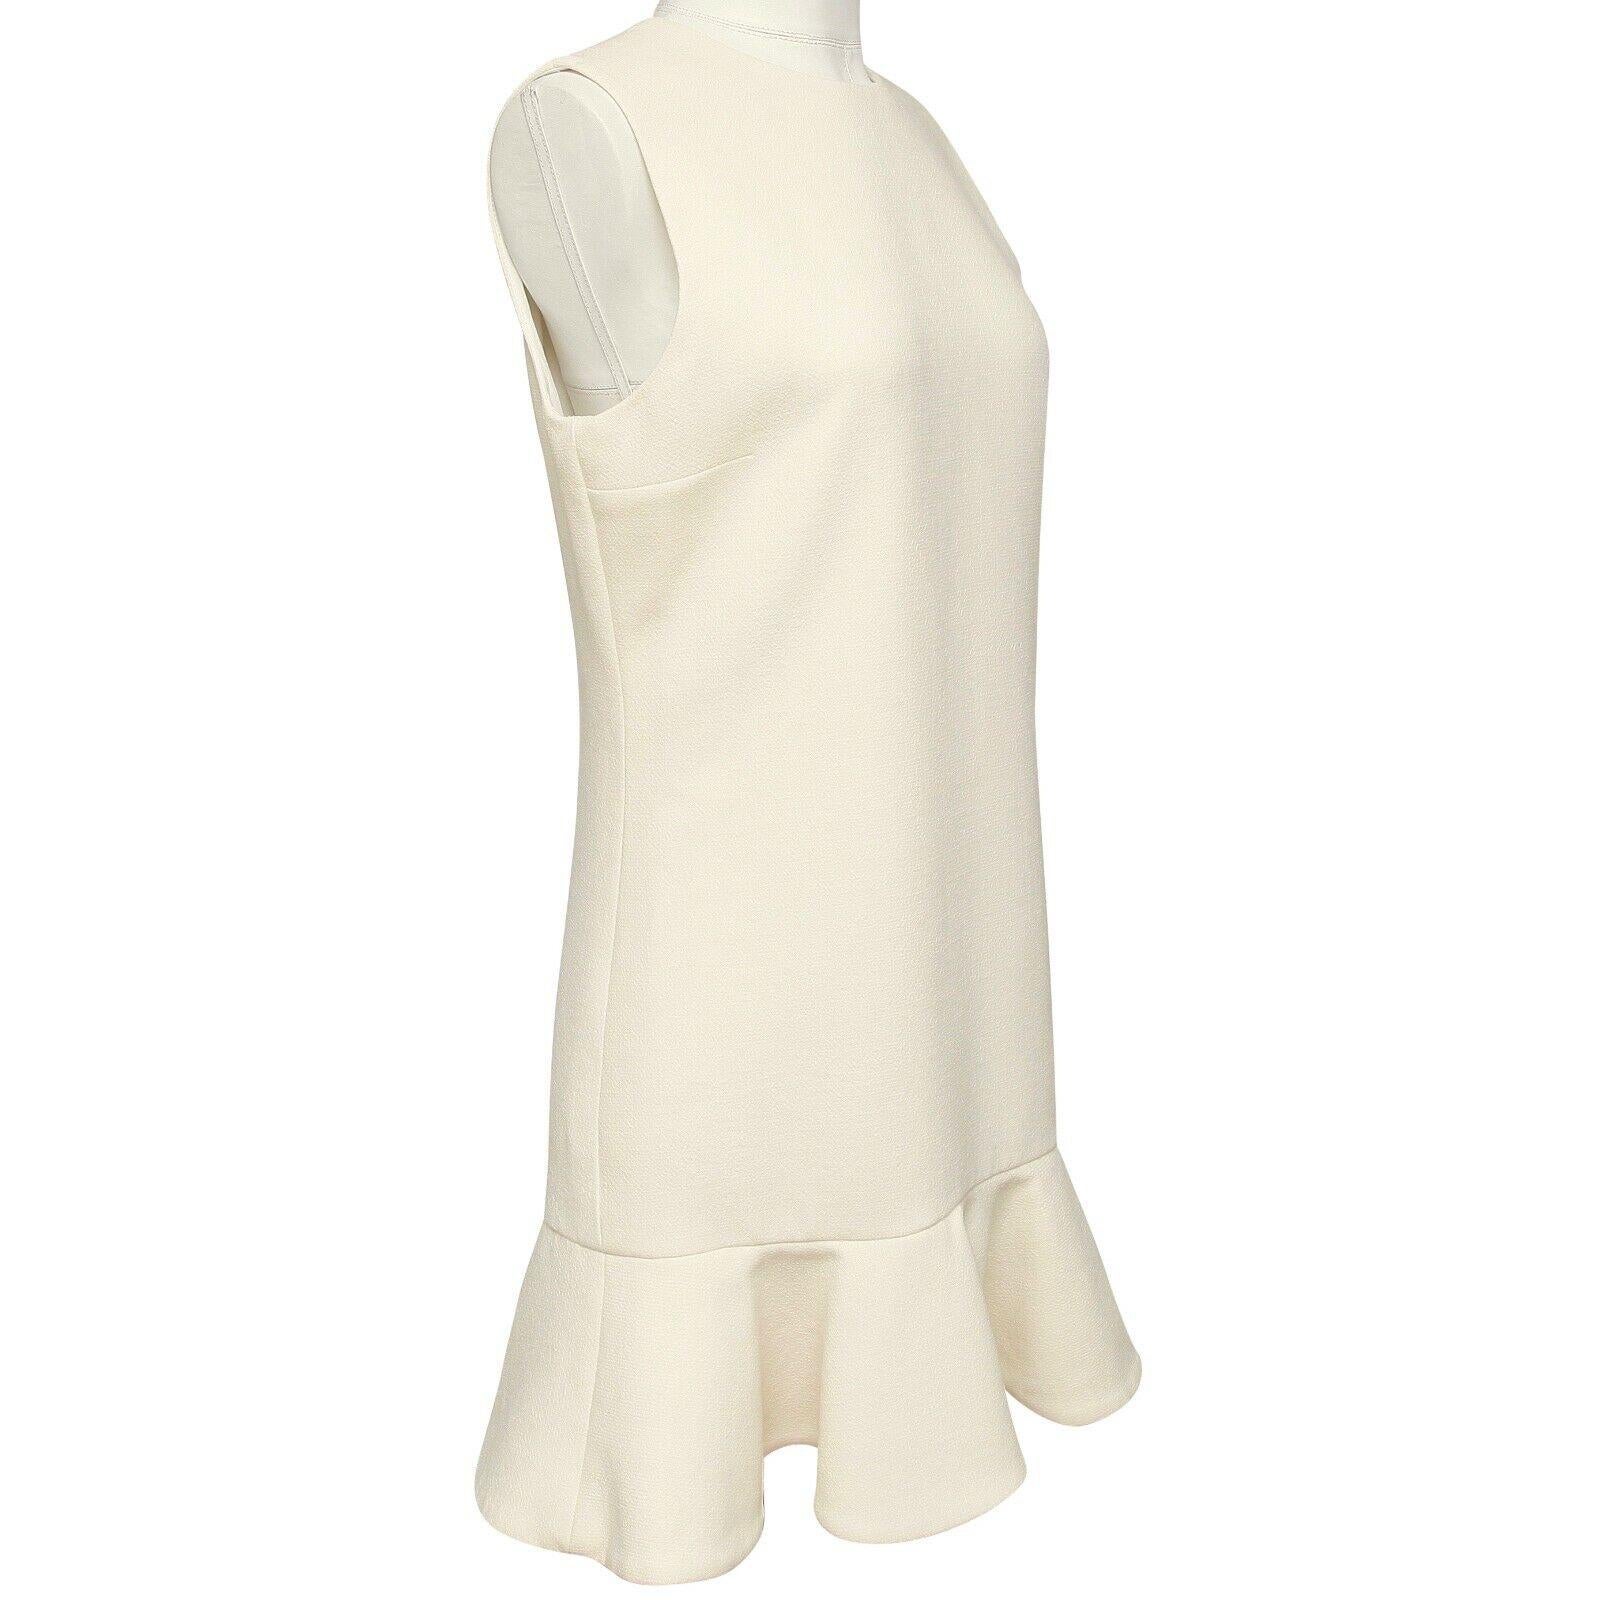 GUARANTEED AUTHENTIC VICTORIA VICTORIA BECKHAM IVORY FLARED SLEEVELESS DRESS


Design:
- Lovely ivory sleeveless dress.
- Crew neck.
- Flared hem.
- Concealed back zipper.
- Beautiful, lightweight year round.
- Lined.

Size: M, Tag Removed, Refer to